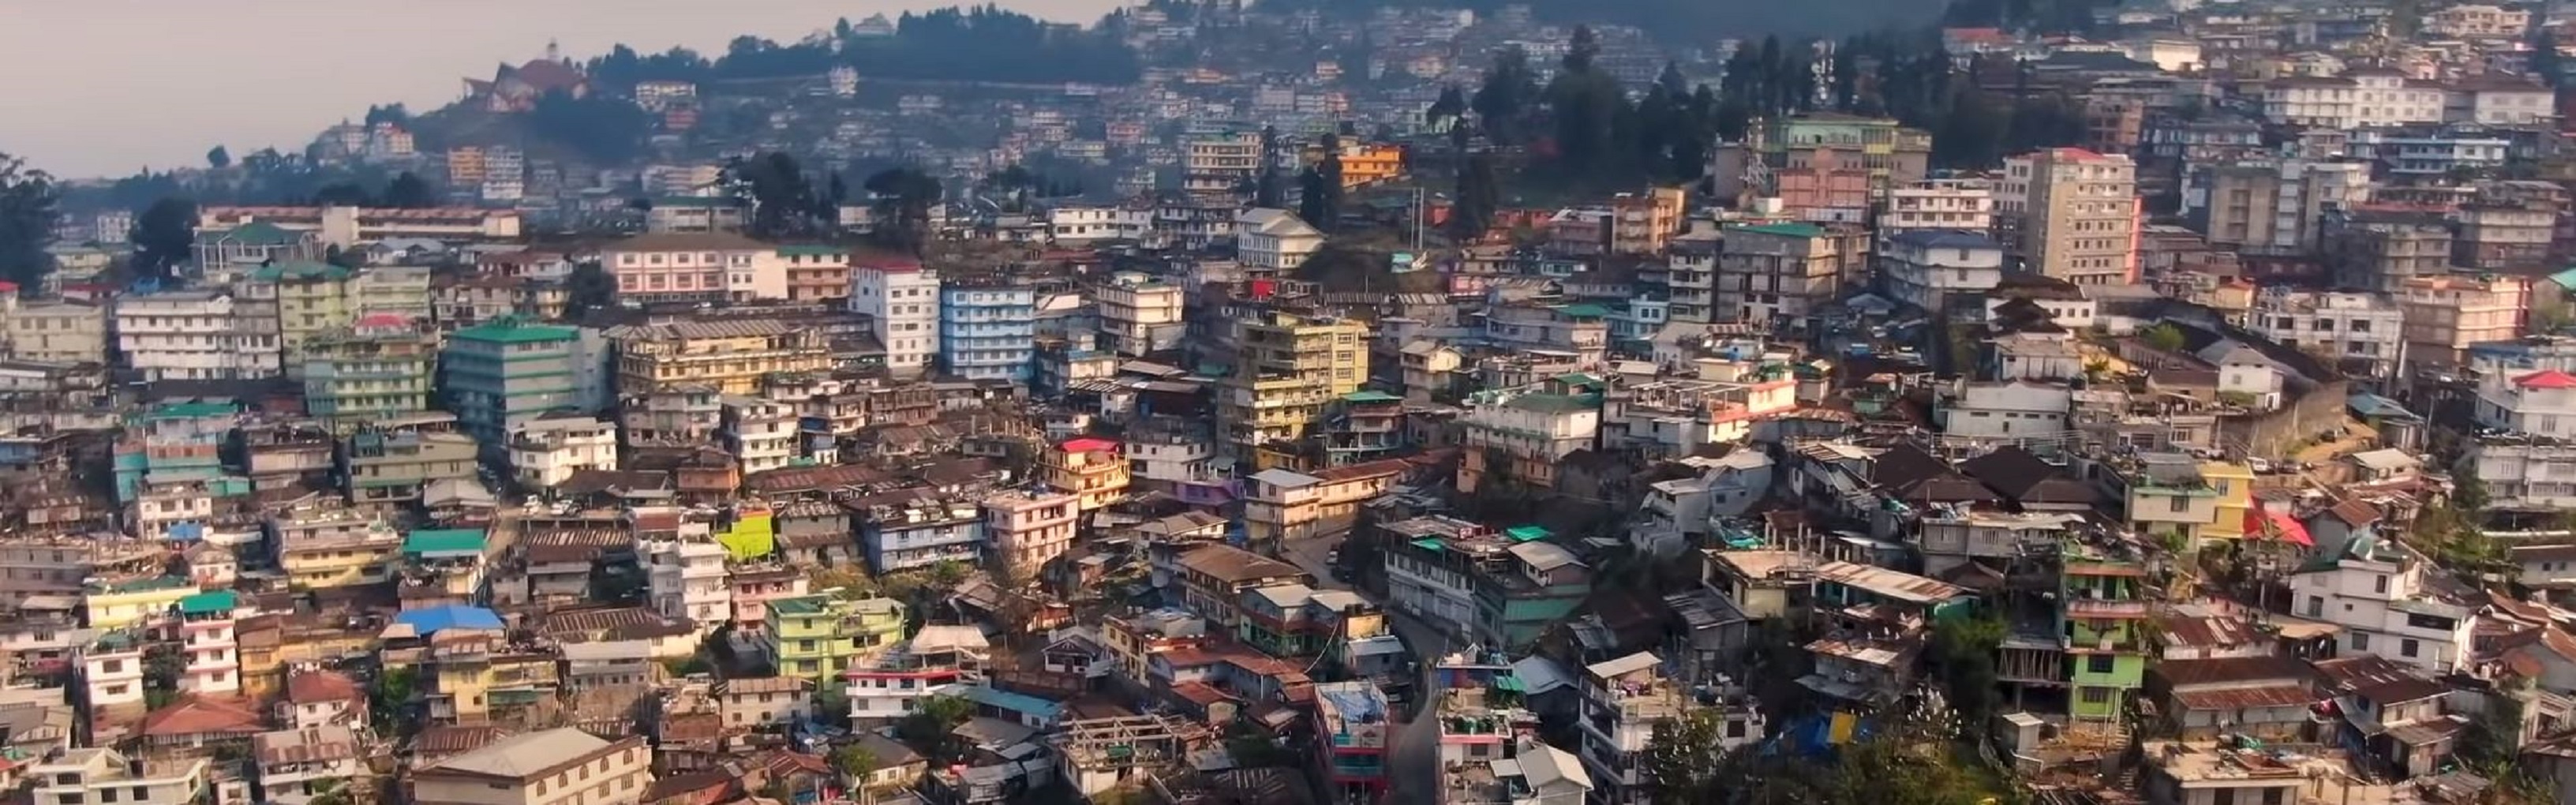 Aerial view of Kohima town